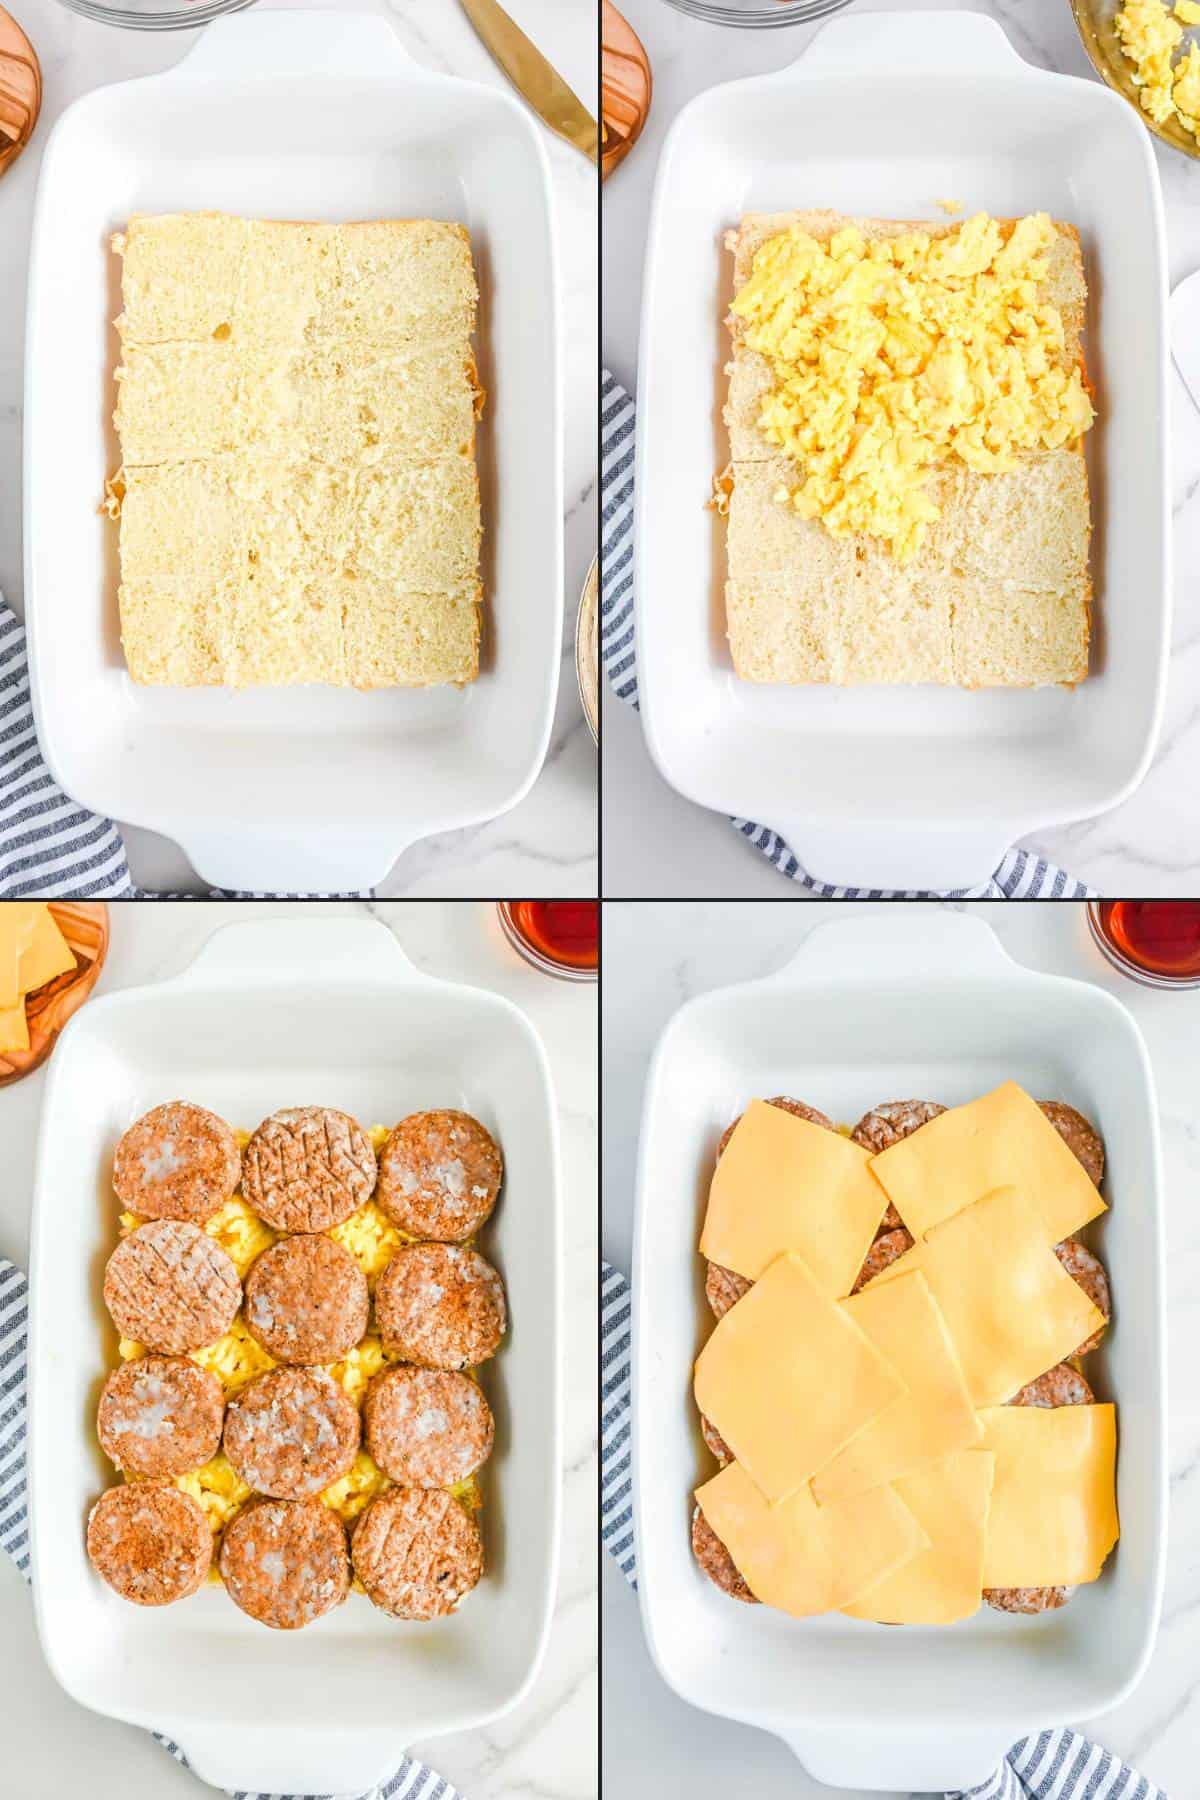 Collage of placing Hawaiian rolls, scrambled eggs, sausage, and cheese in a baking dish.